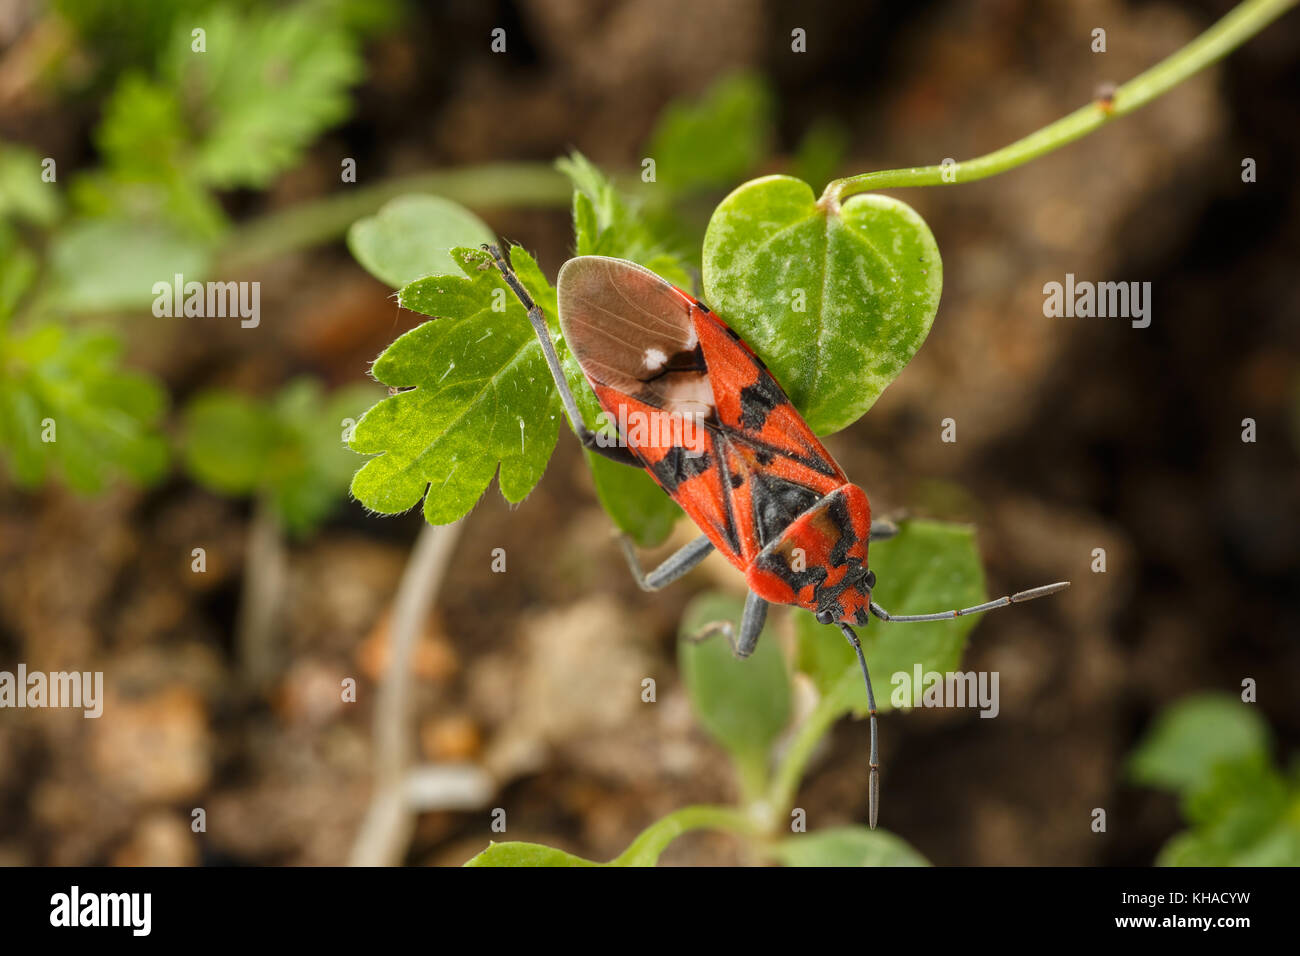 Upperside view of red insect over weed leaves. Wildlife macro photography of seed bug Spilostethus pandurus Stock Photo